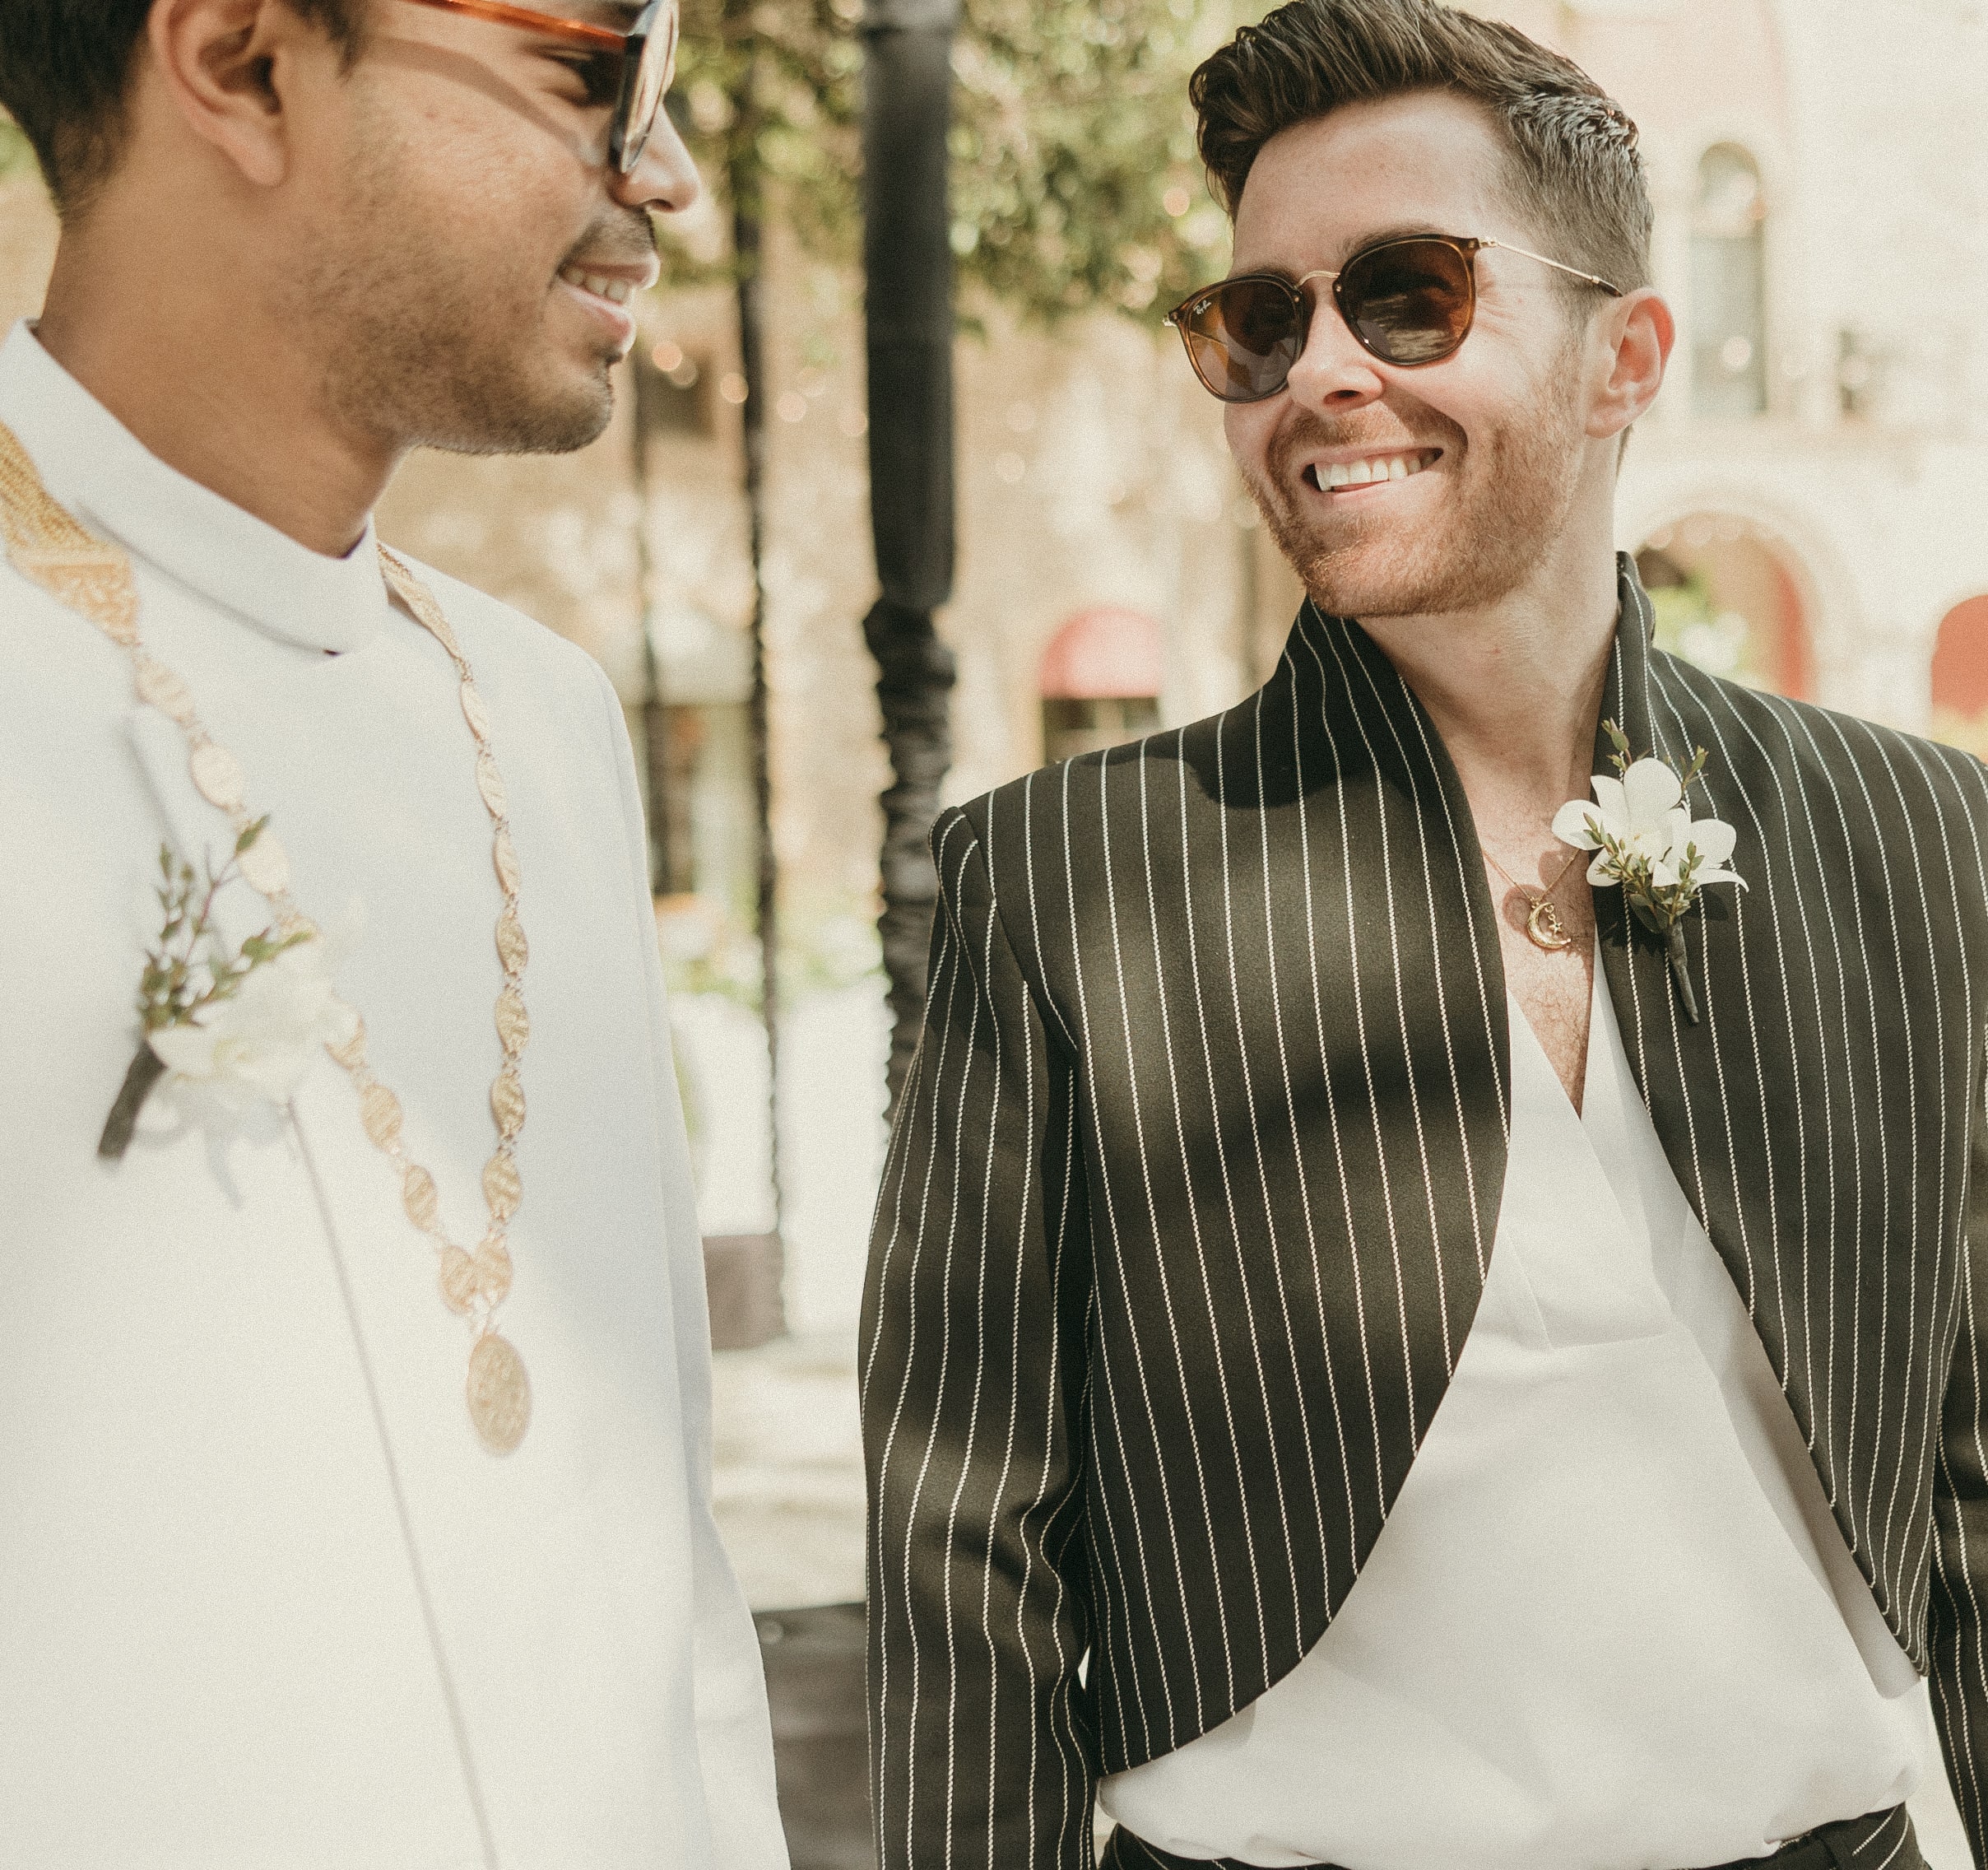 Grooms smiling at each other while viewing the reception-site before guests arrive